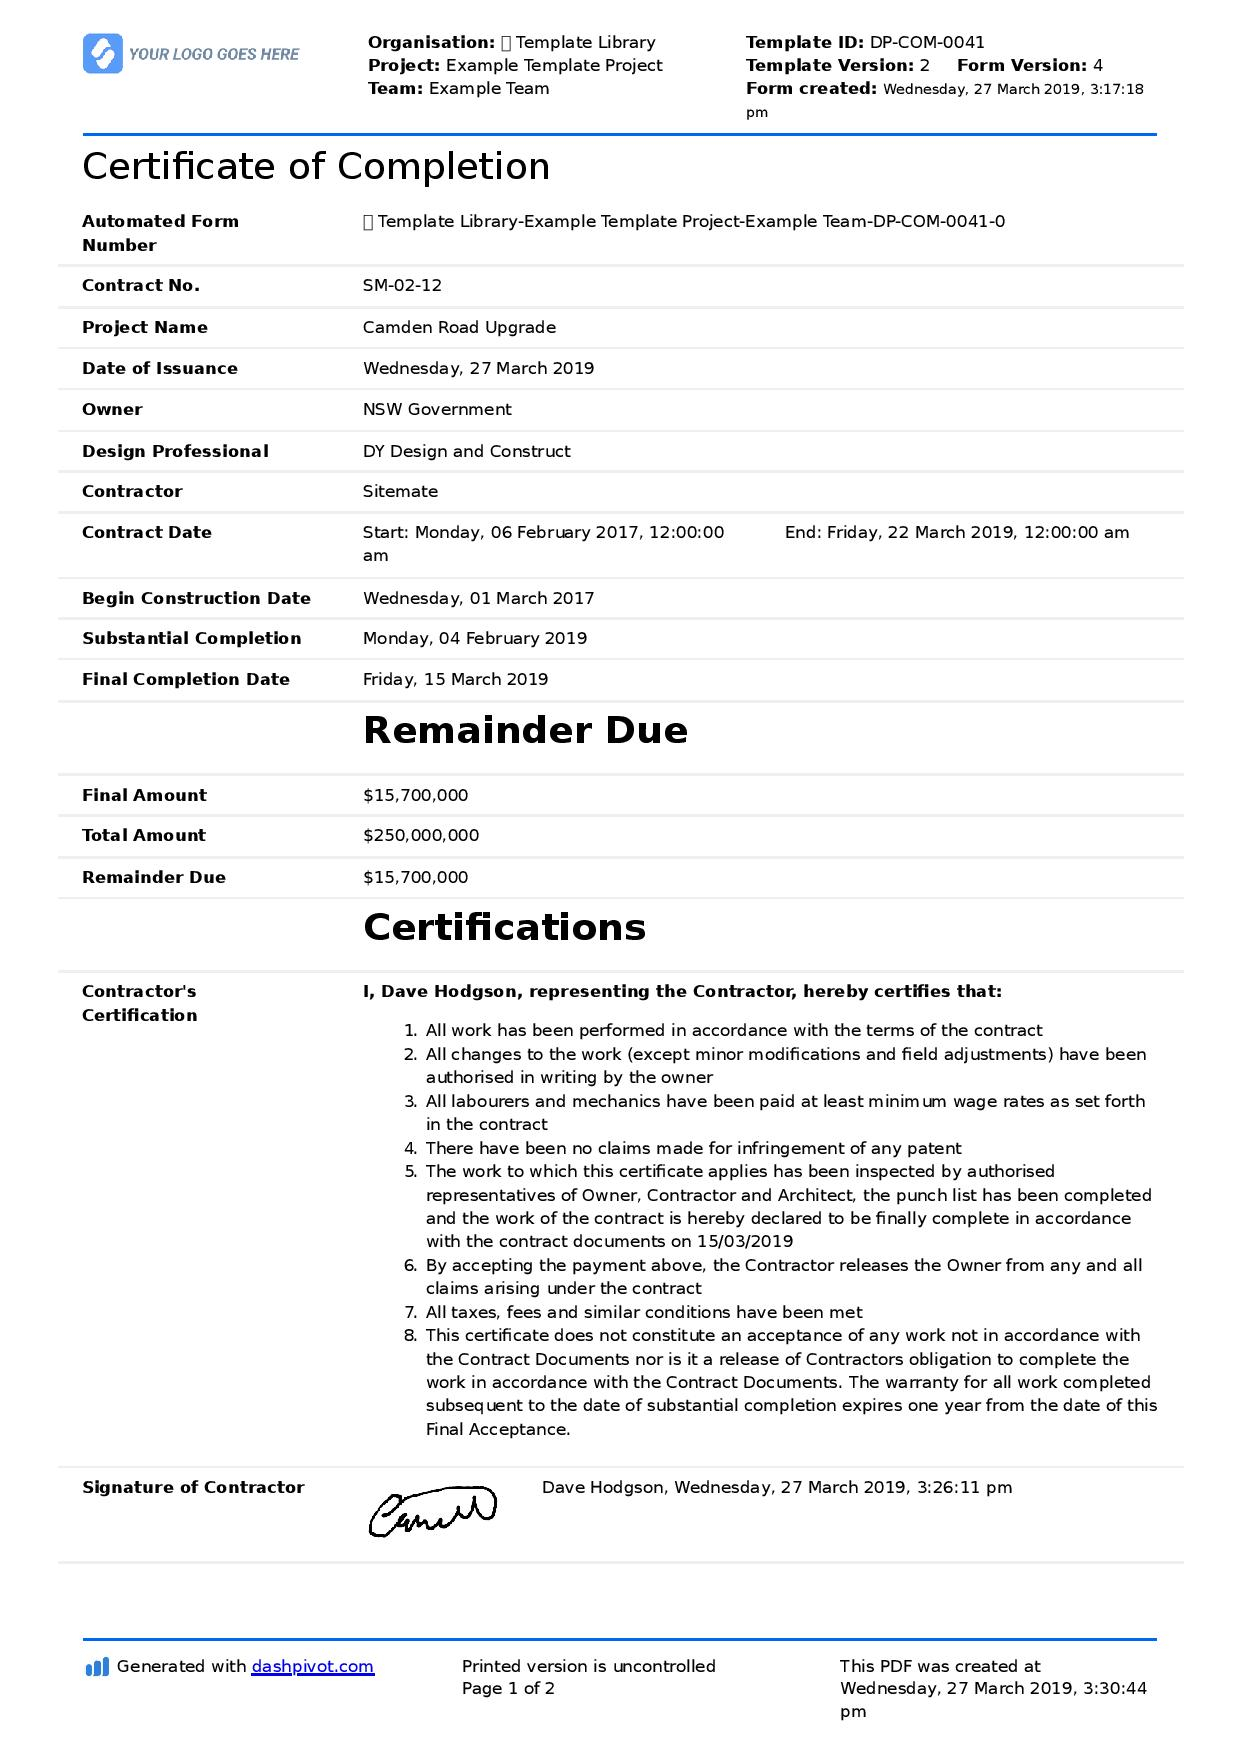 Certificate Of Completion For Construction (Free Template + Sample) Throughout Certificate Of Completion Construction Templates